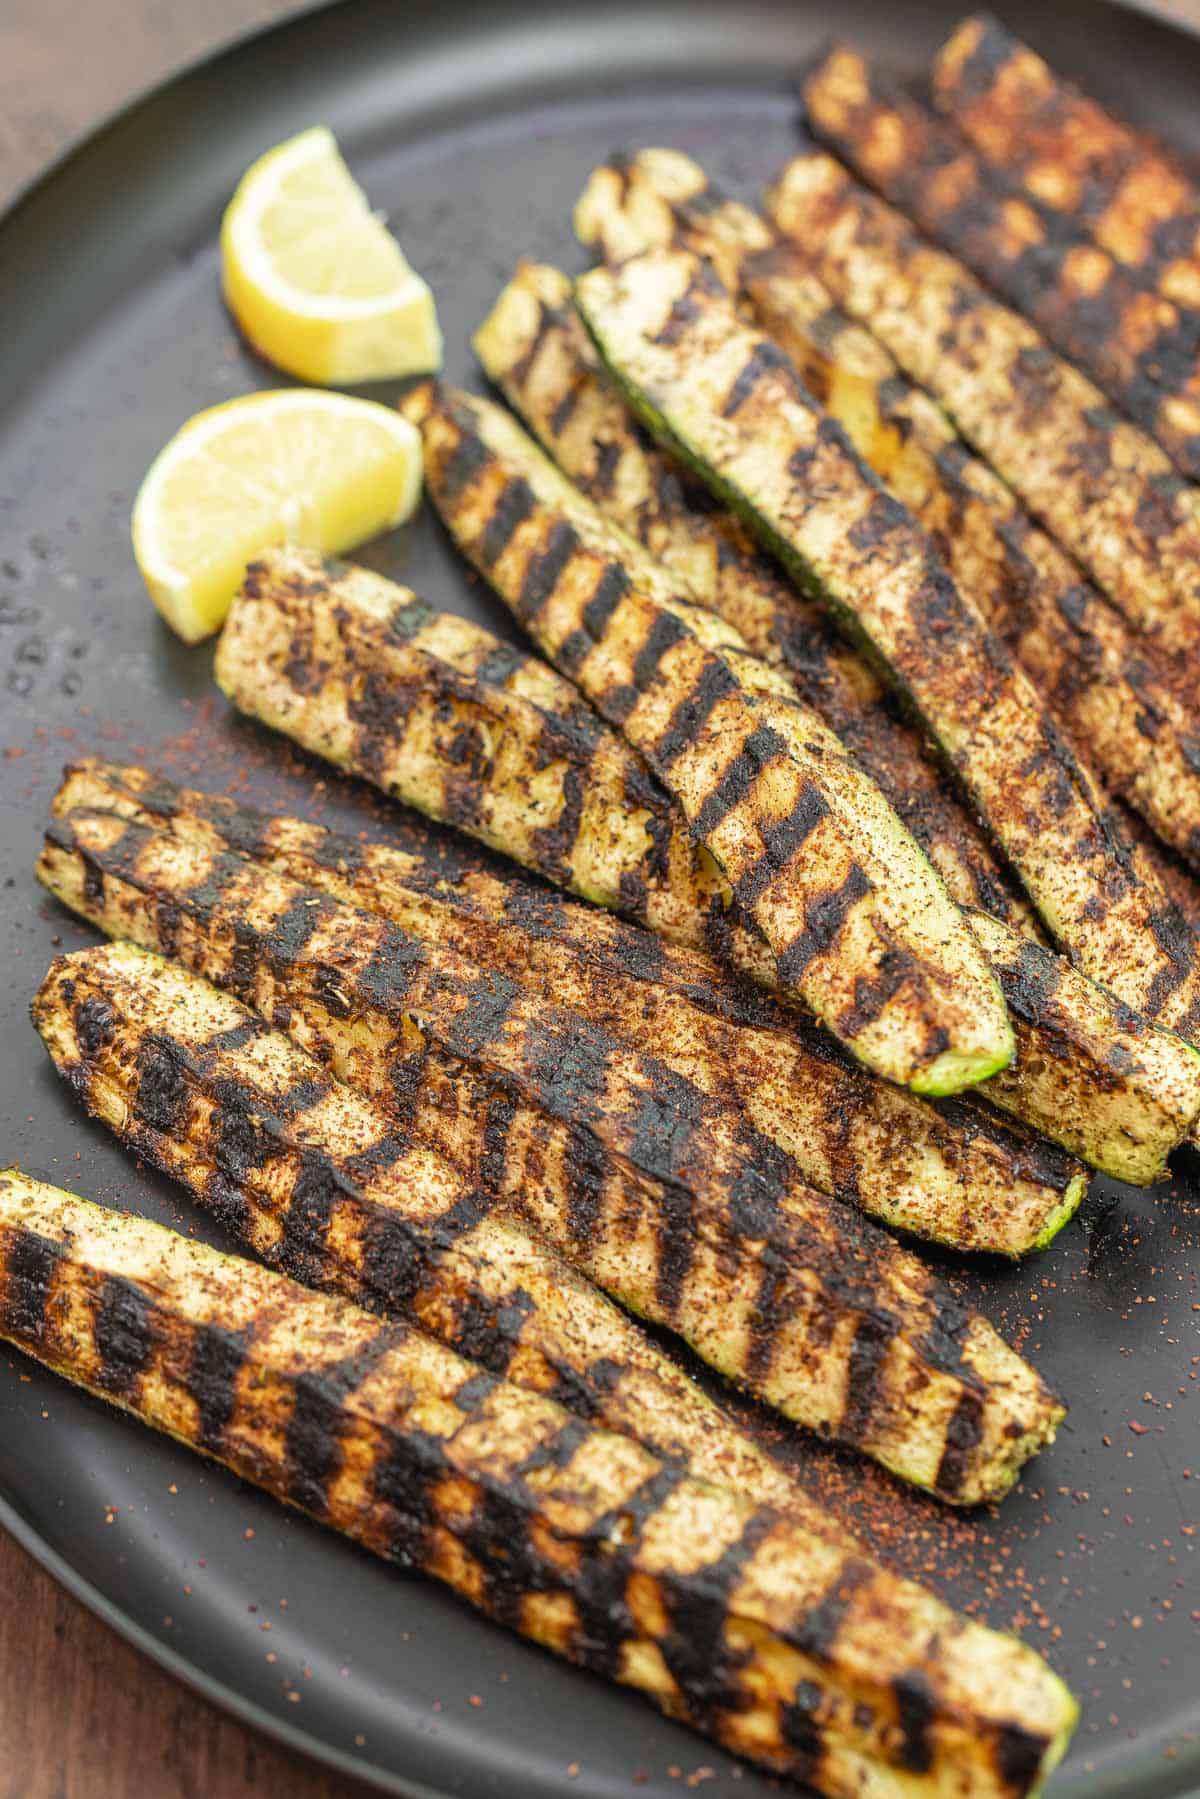 grilled zucchini with char marks on a plate with lemon slices.